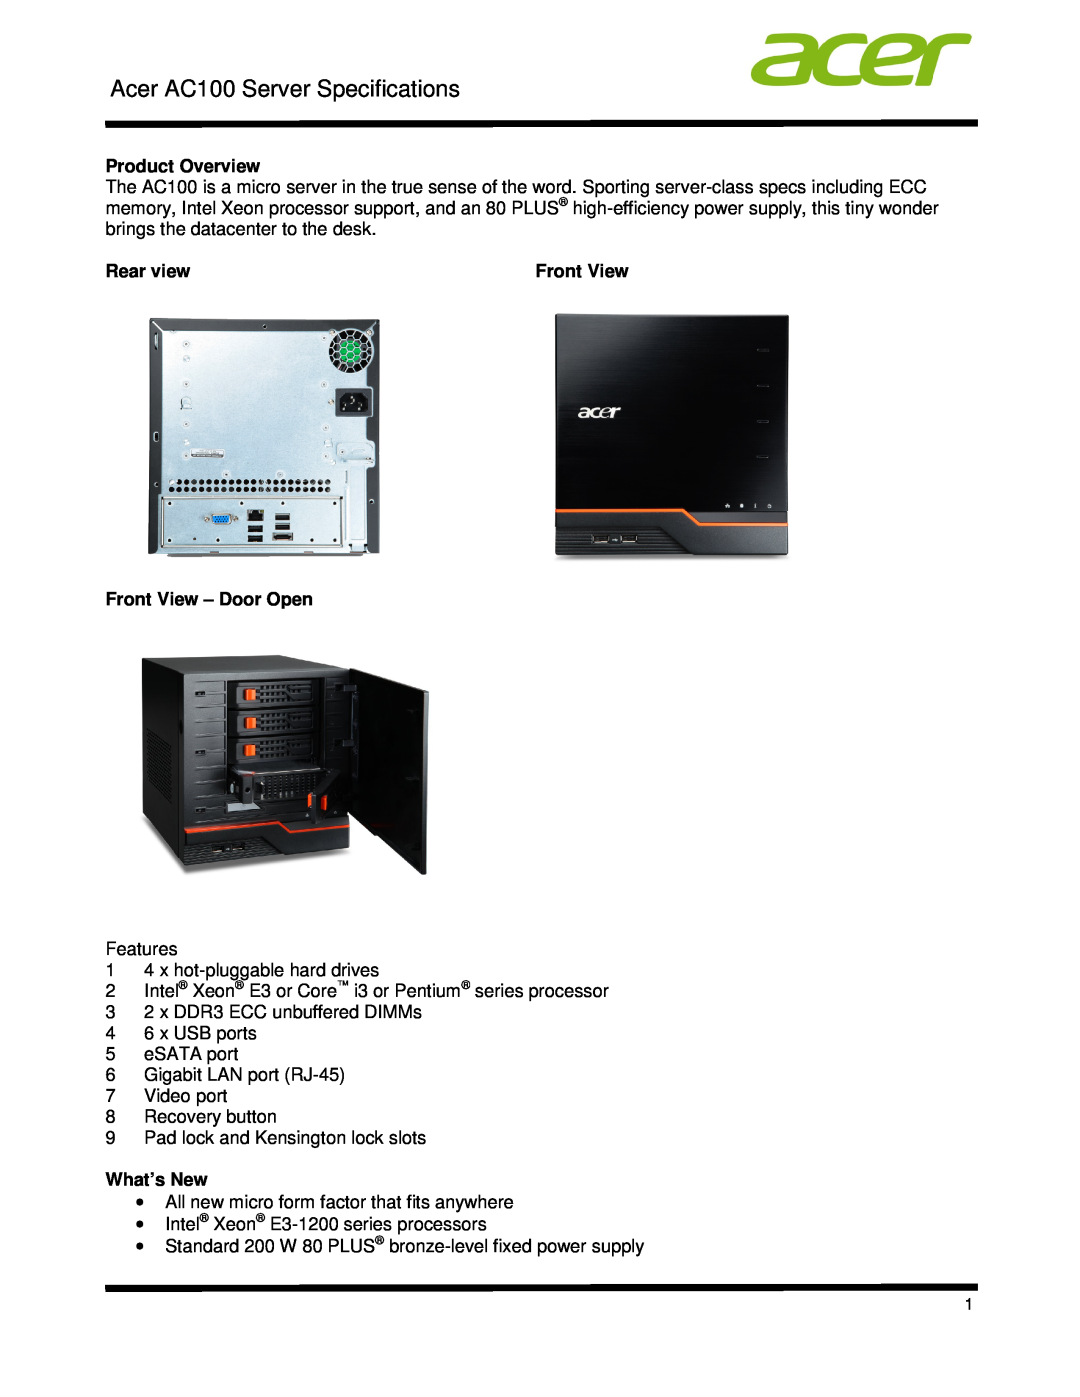 Acer STR7LAA001 specifications Acer AC100 Server Specifications, Product Overview, Rear view, Front View - Door Open 